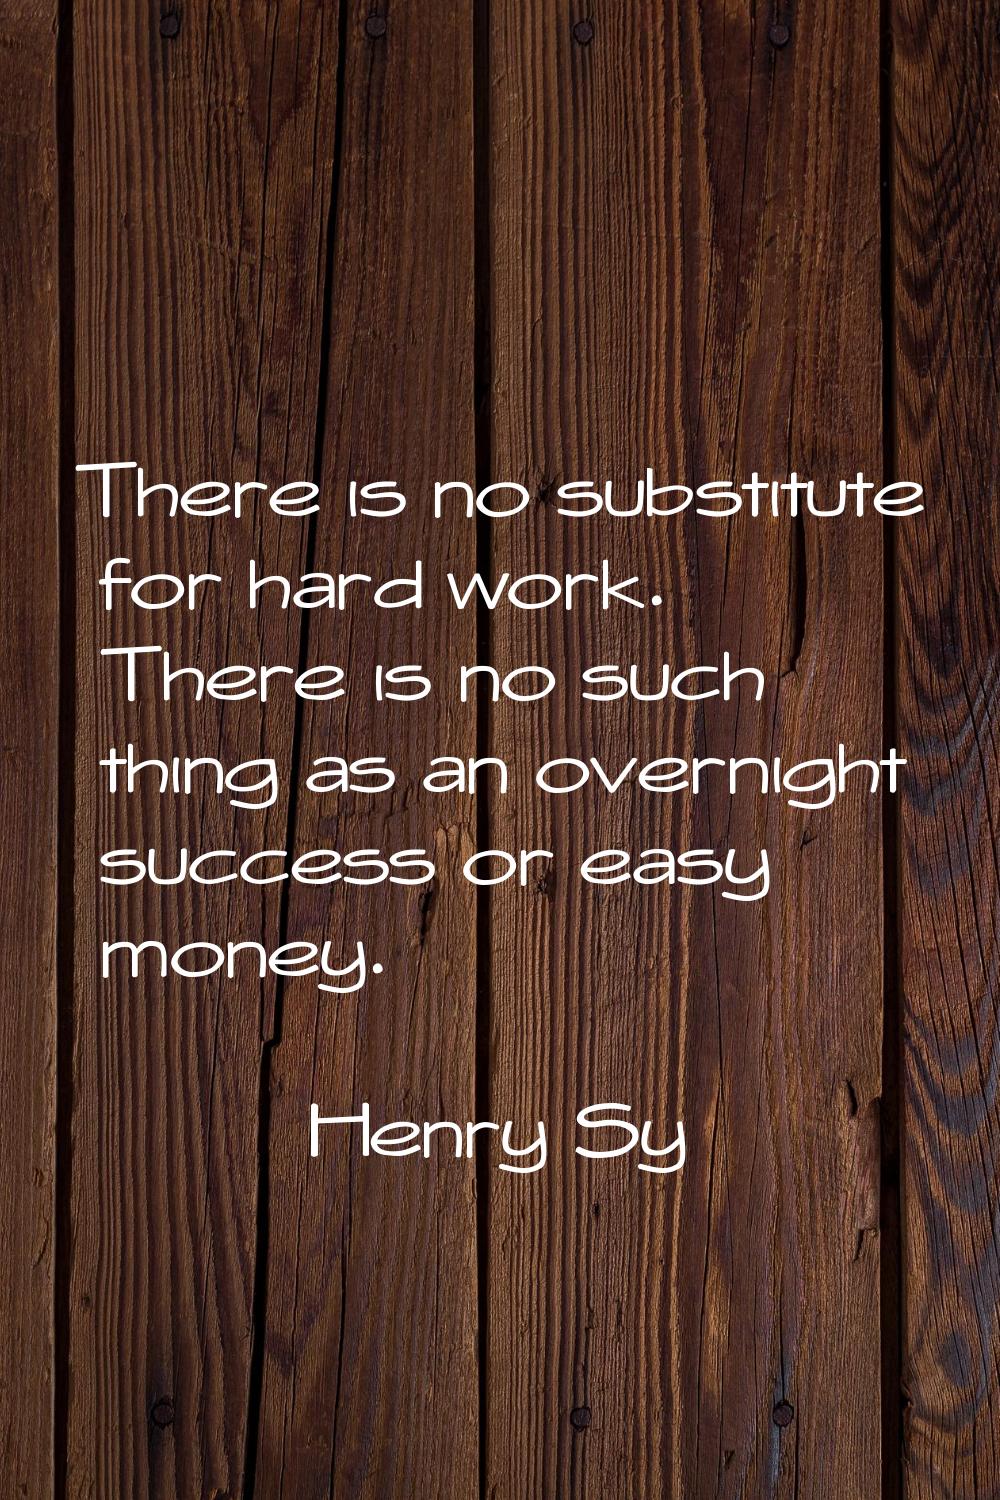 There is no substitute for hard work. There is no such thing as an overnight success or easy money.